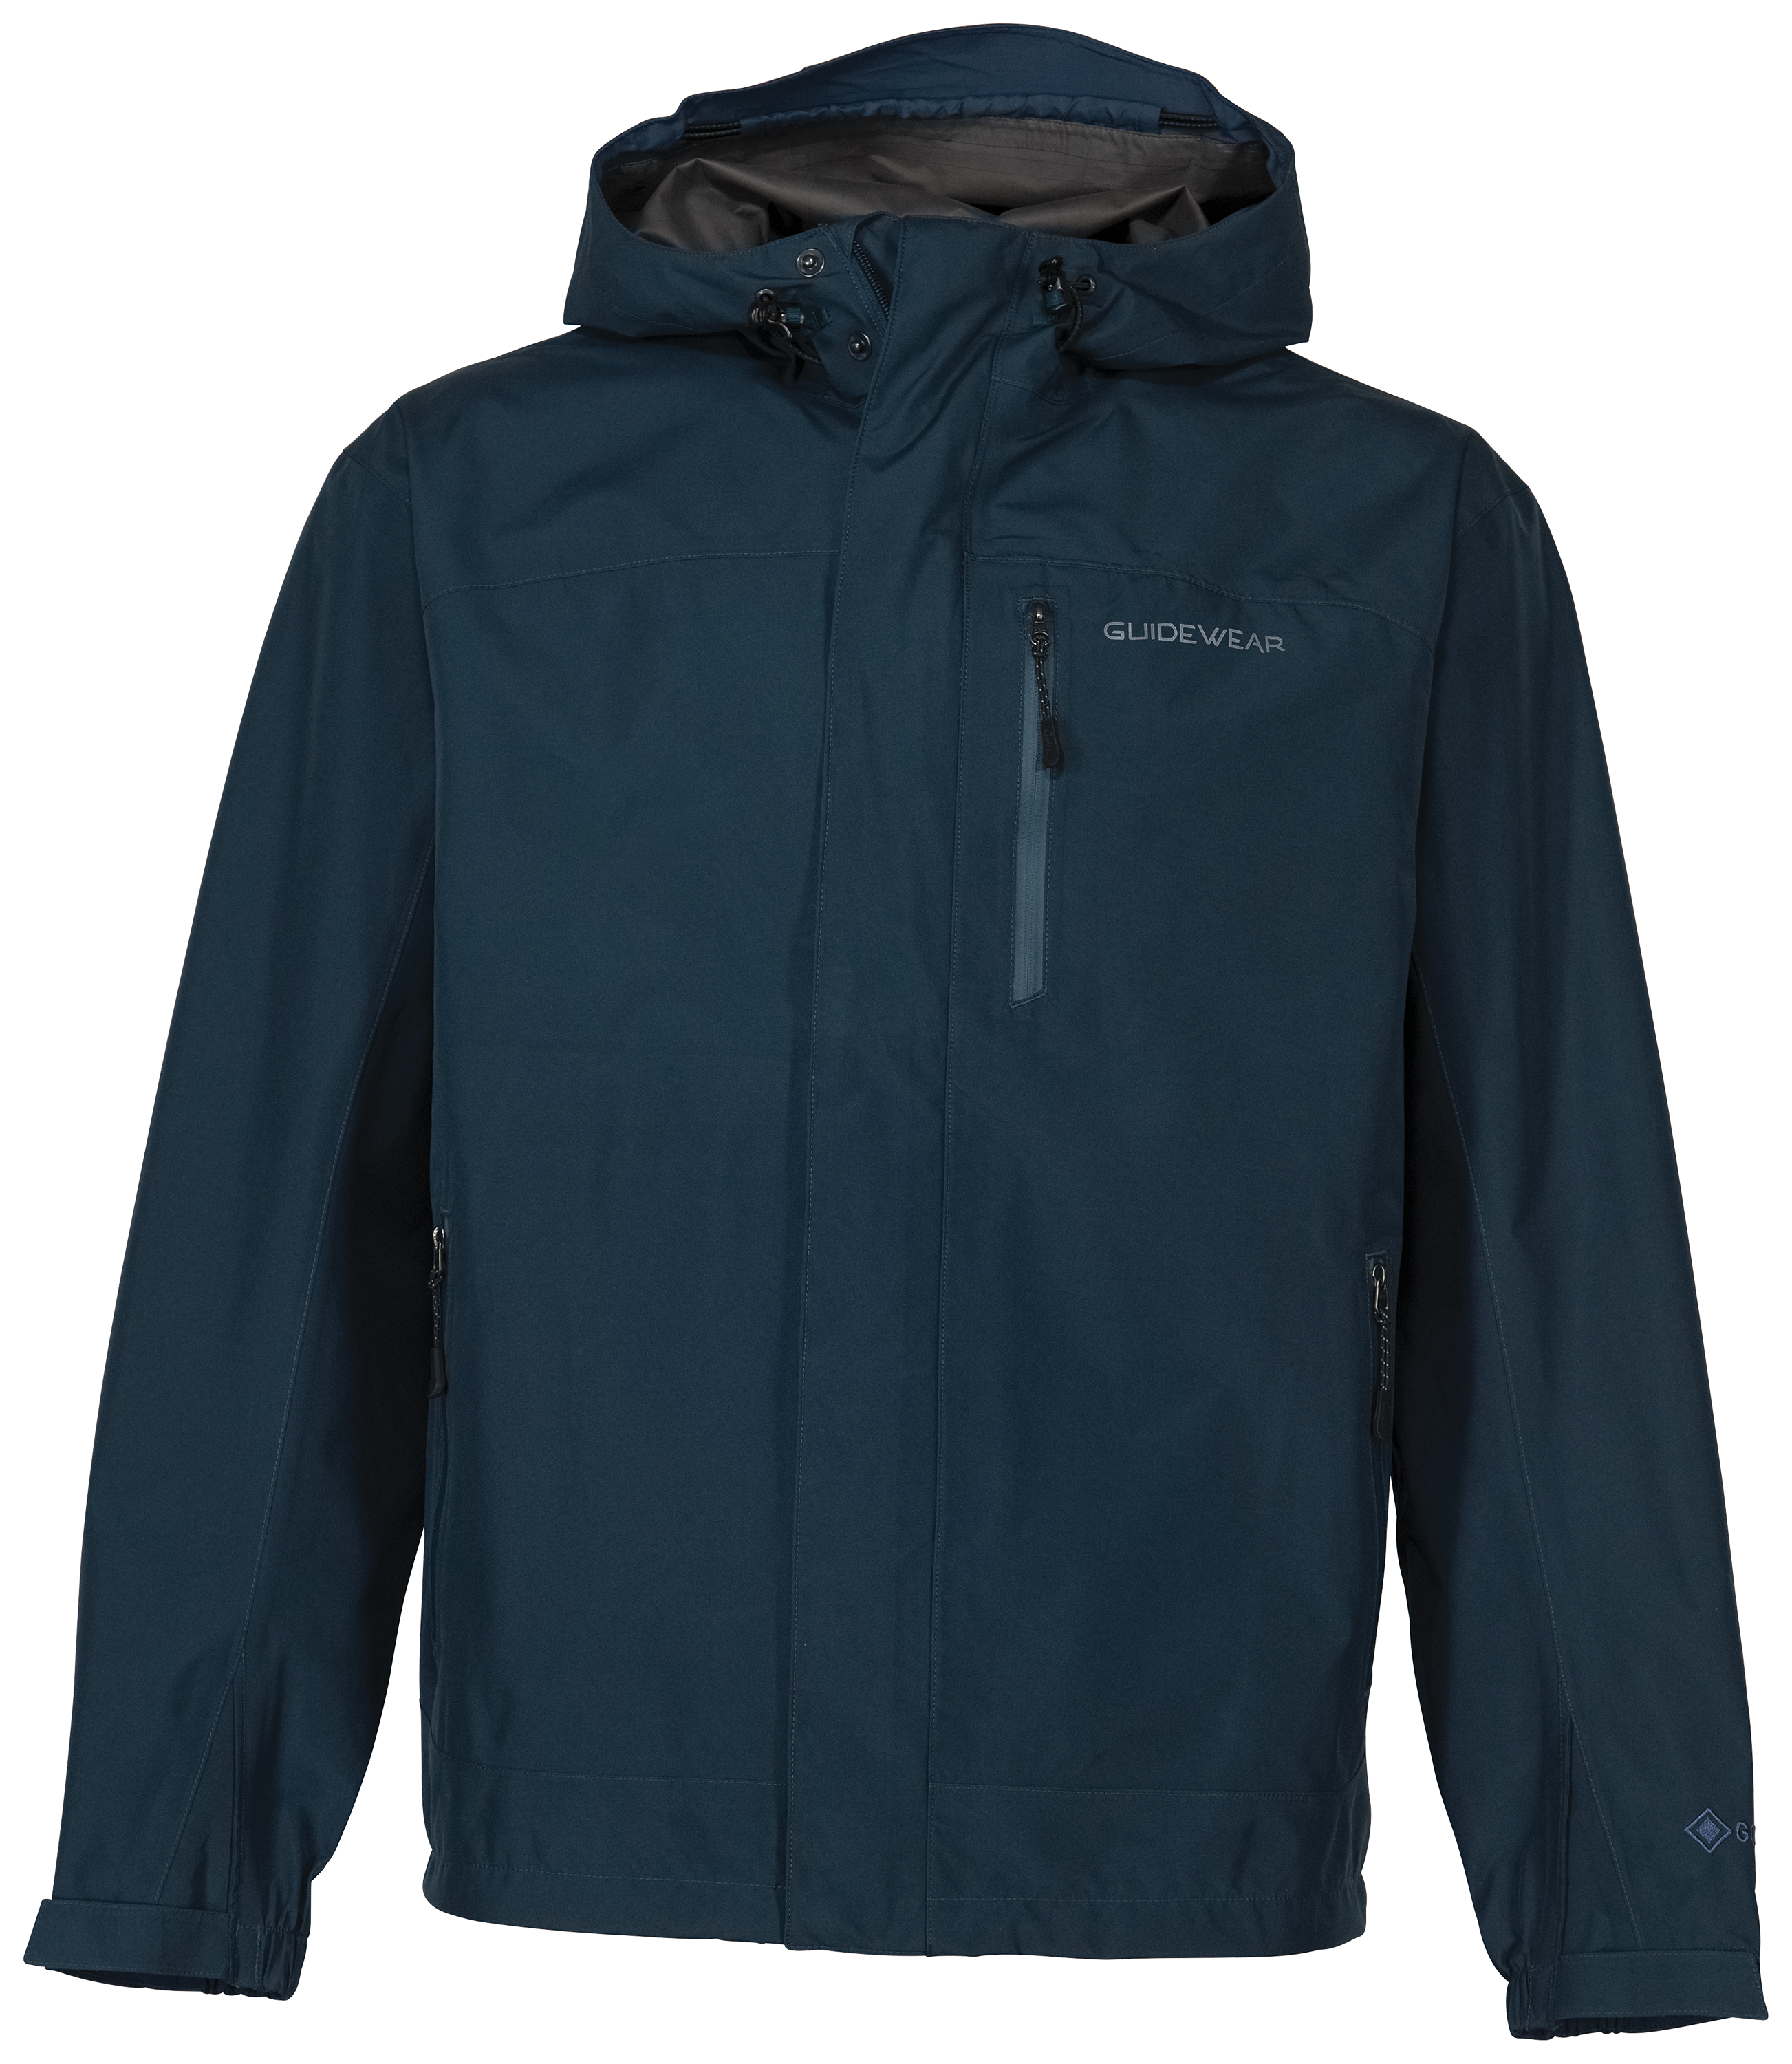 Johnny Morris Bass Pro Shops Guidewear Rainy River Jacket with GORE-TEX PacLite for Men - Shadow Blue - LT